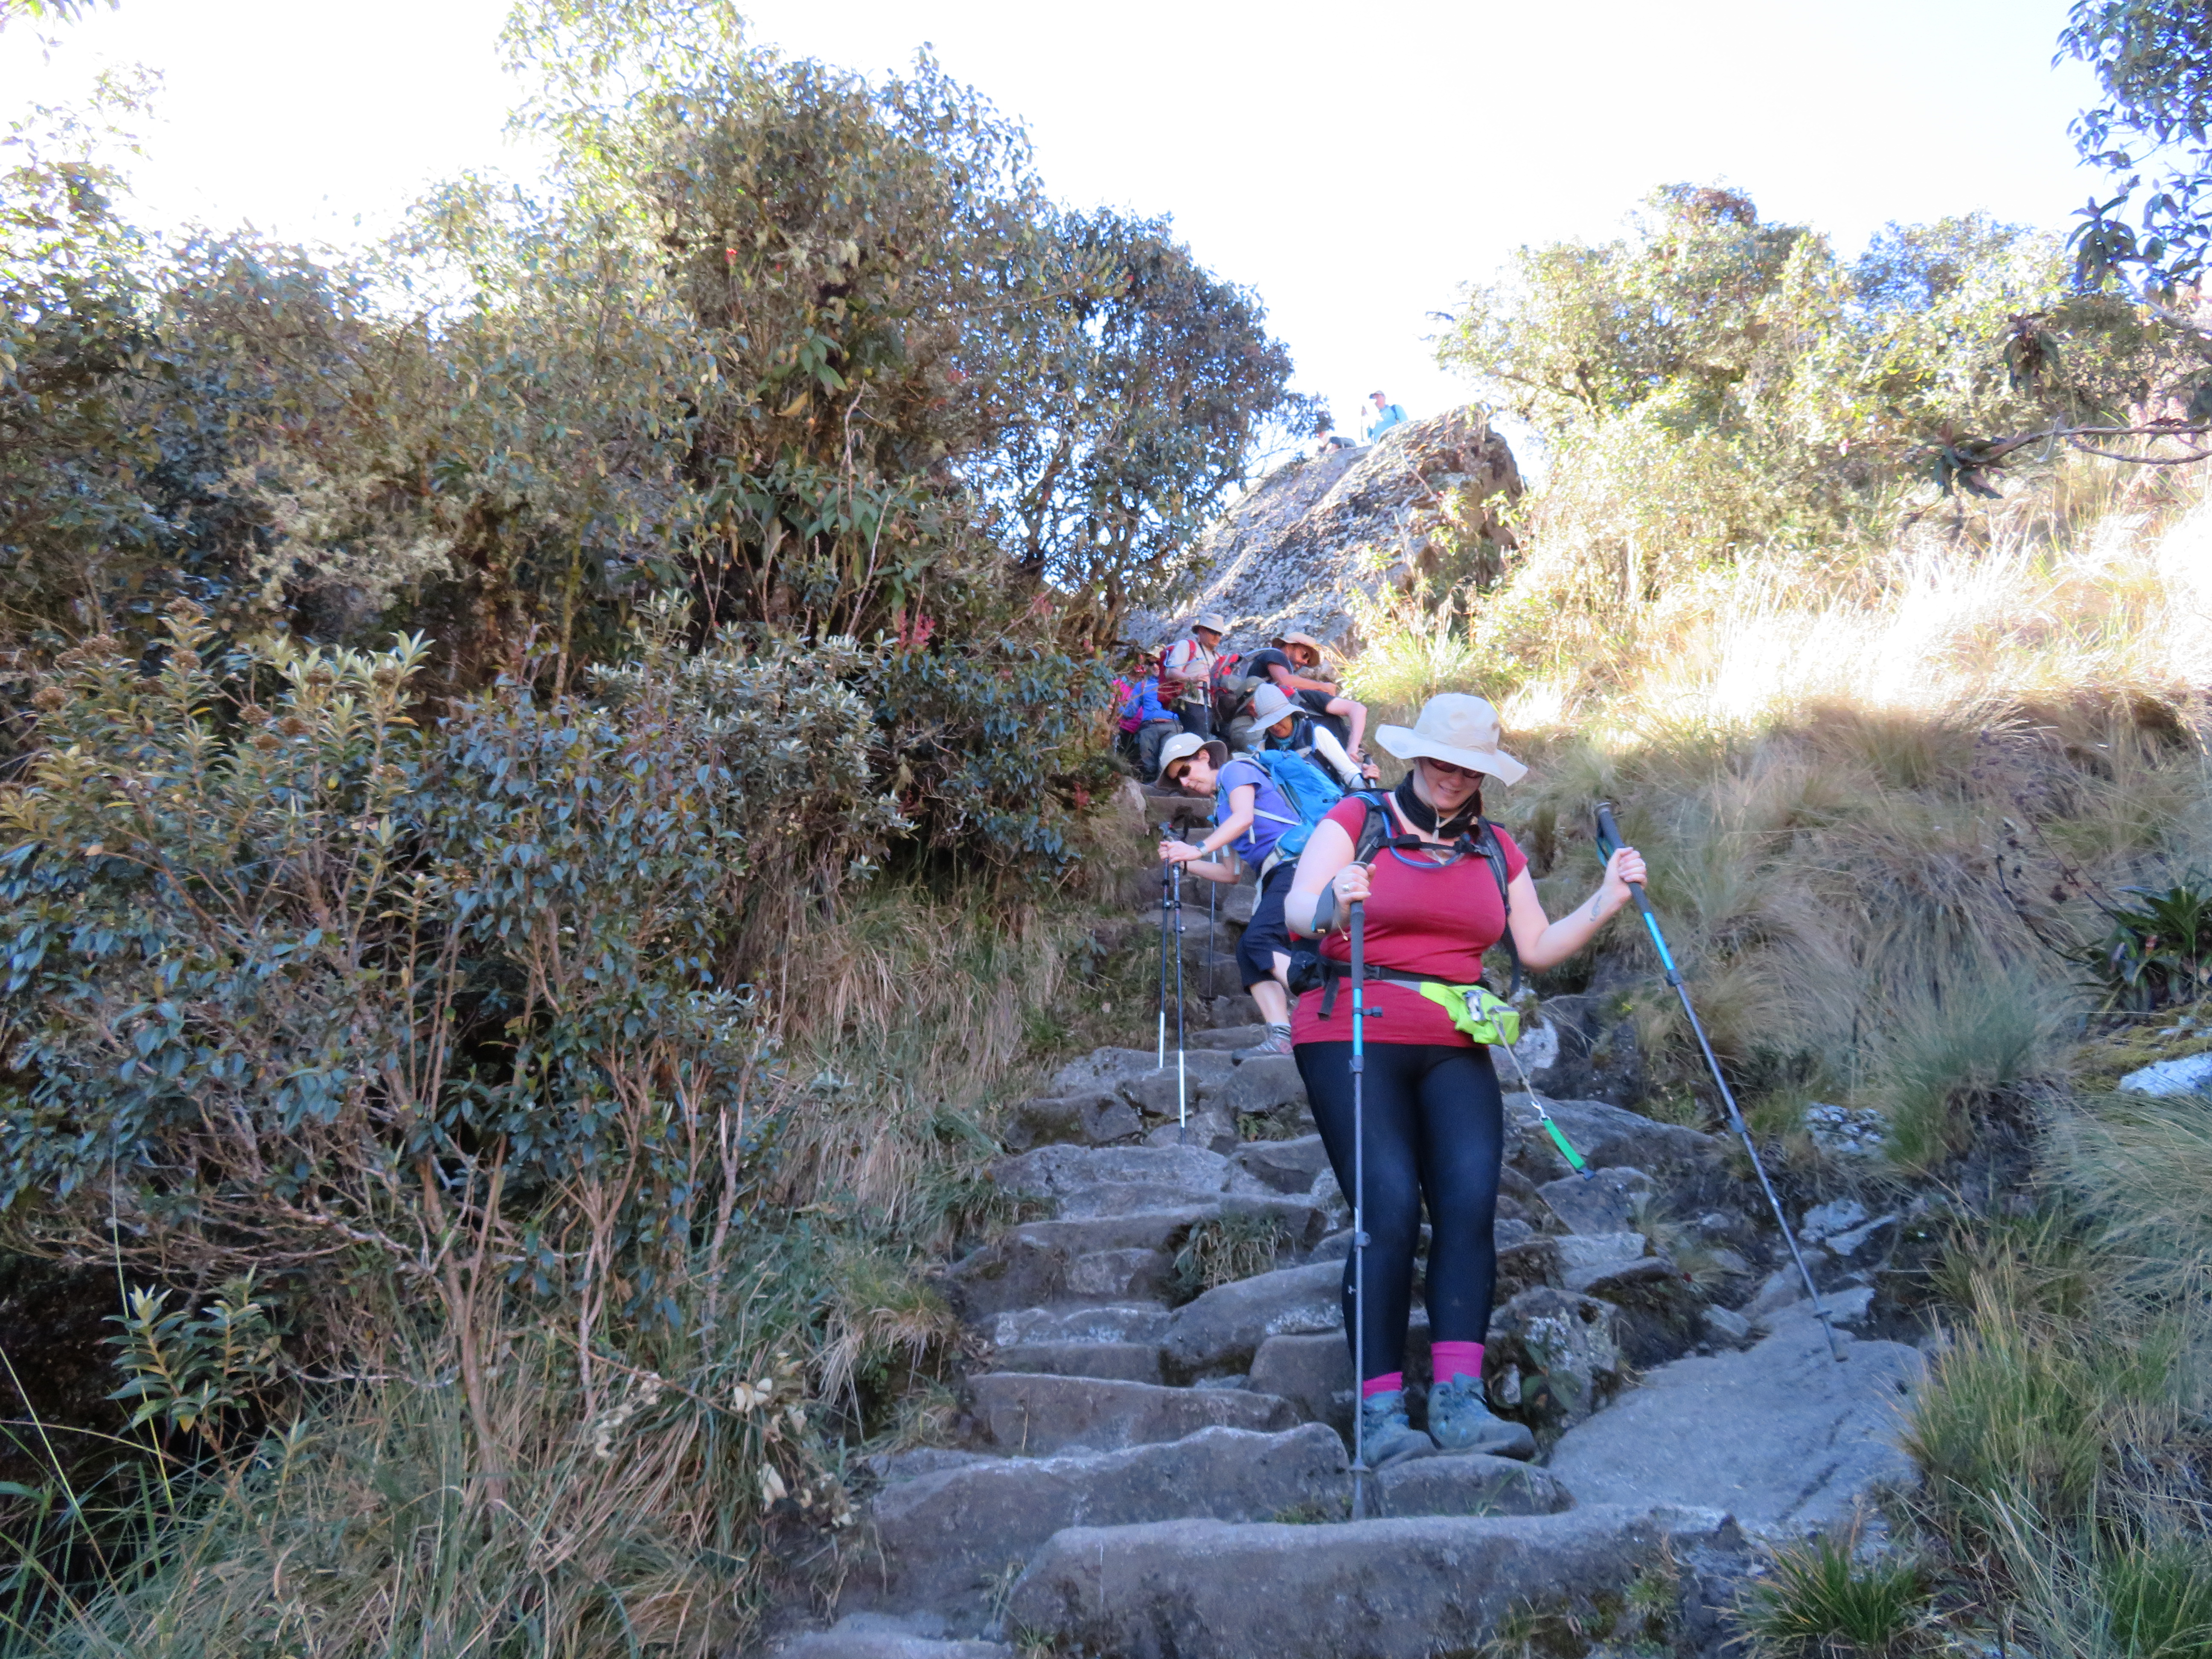 The Many Steps up and down on the Inca Trail